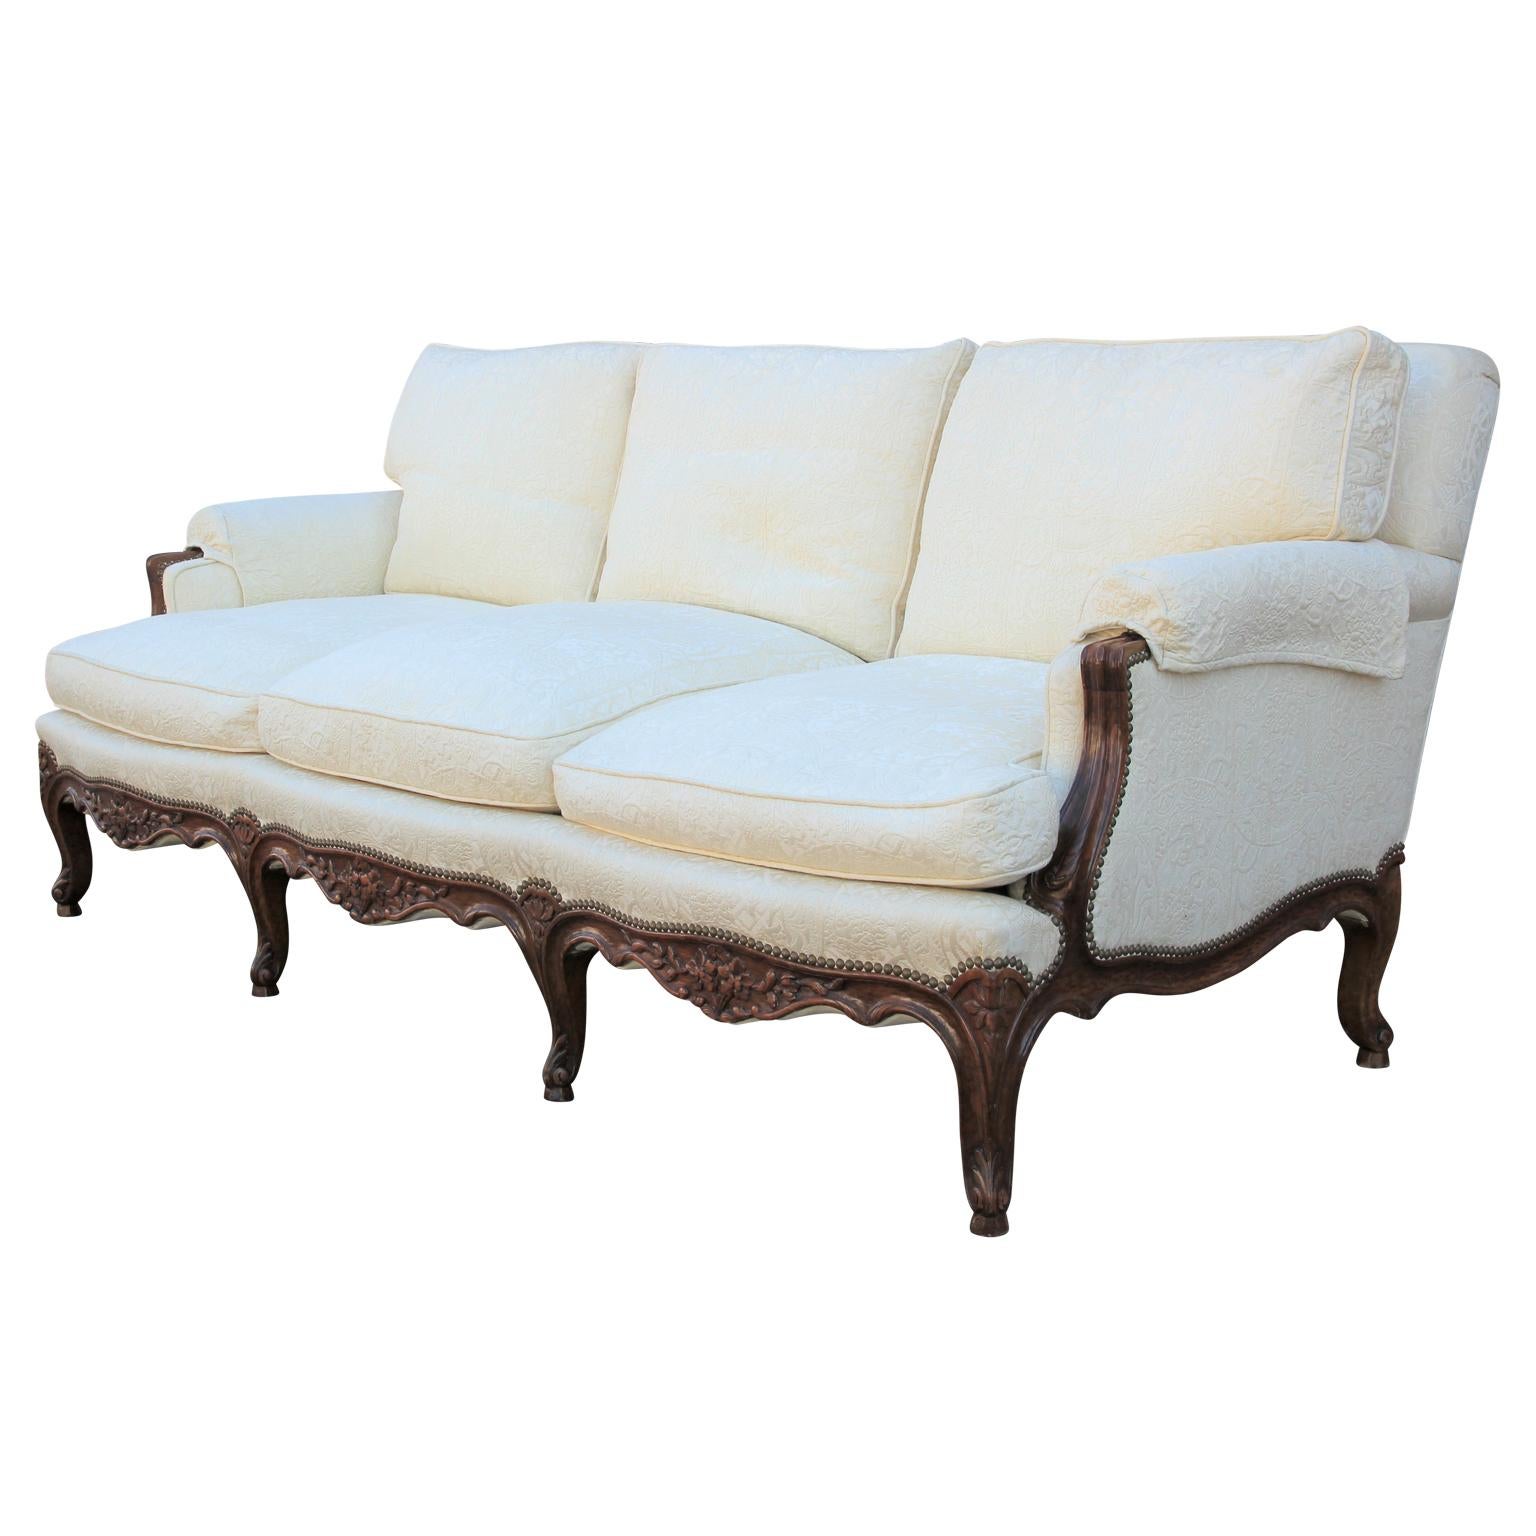 Wonderful Italian carved Rococo three-seat sofa. Excellent quality, circa mid-early 20th century. The fabric is original and very useable, however for perfection COM is suggested.